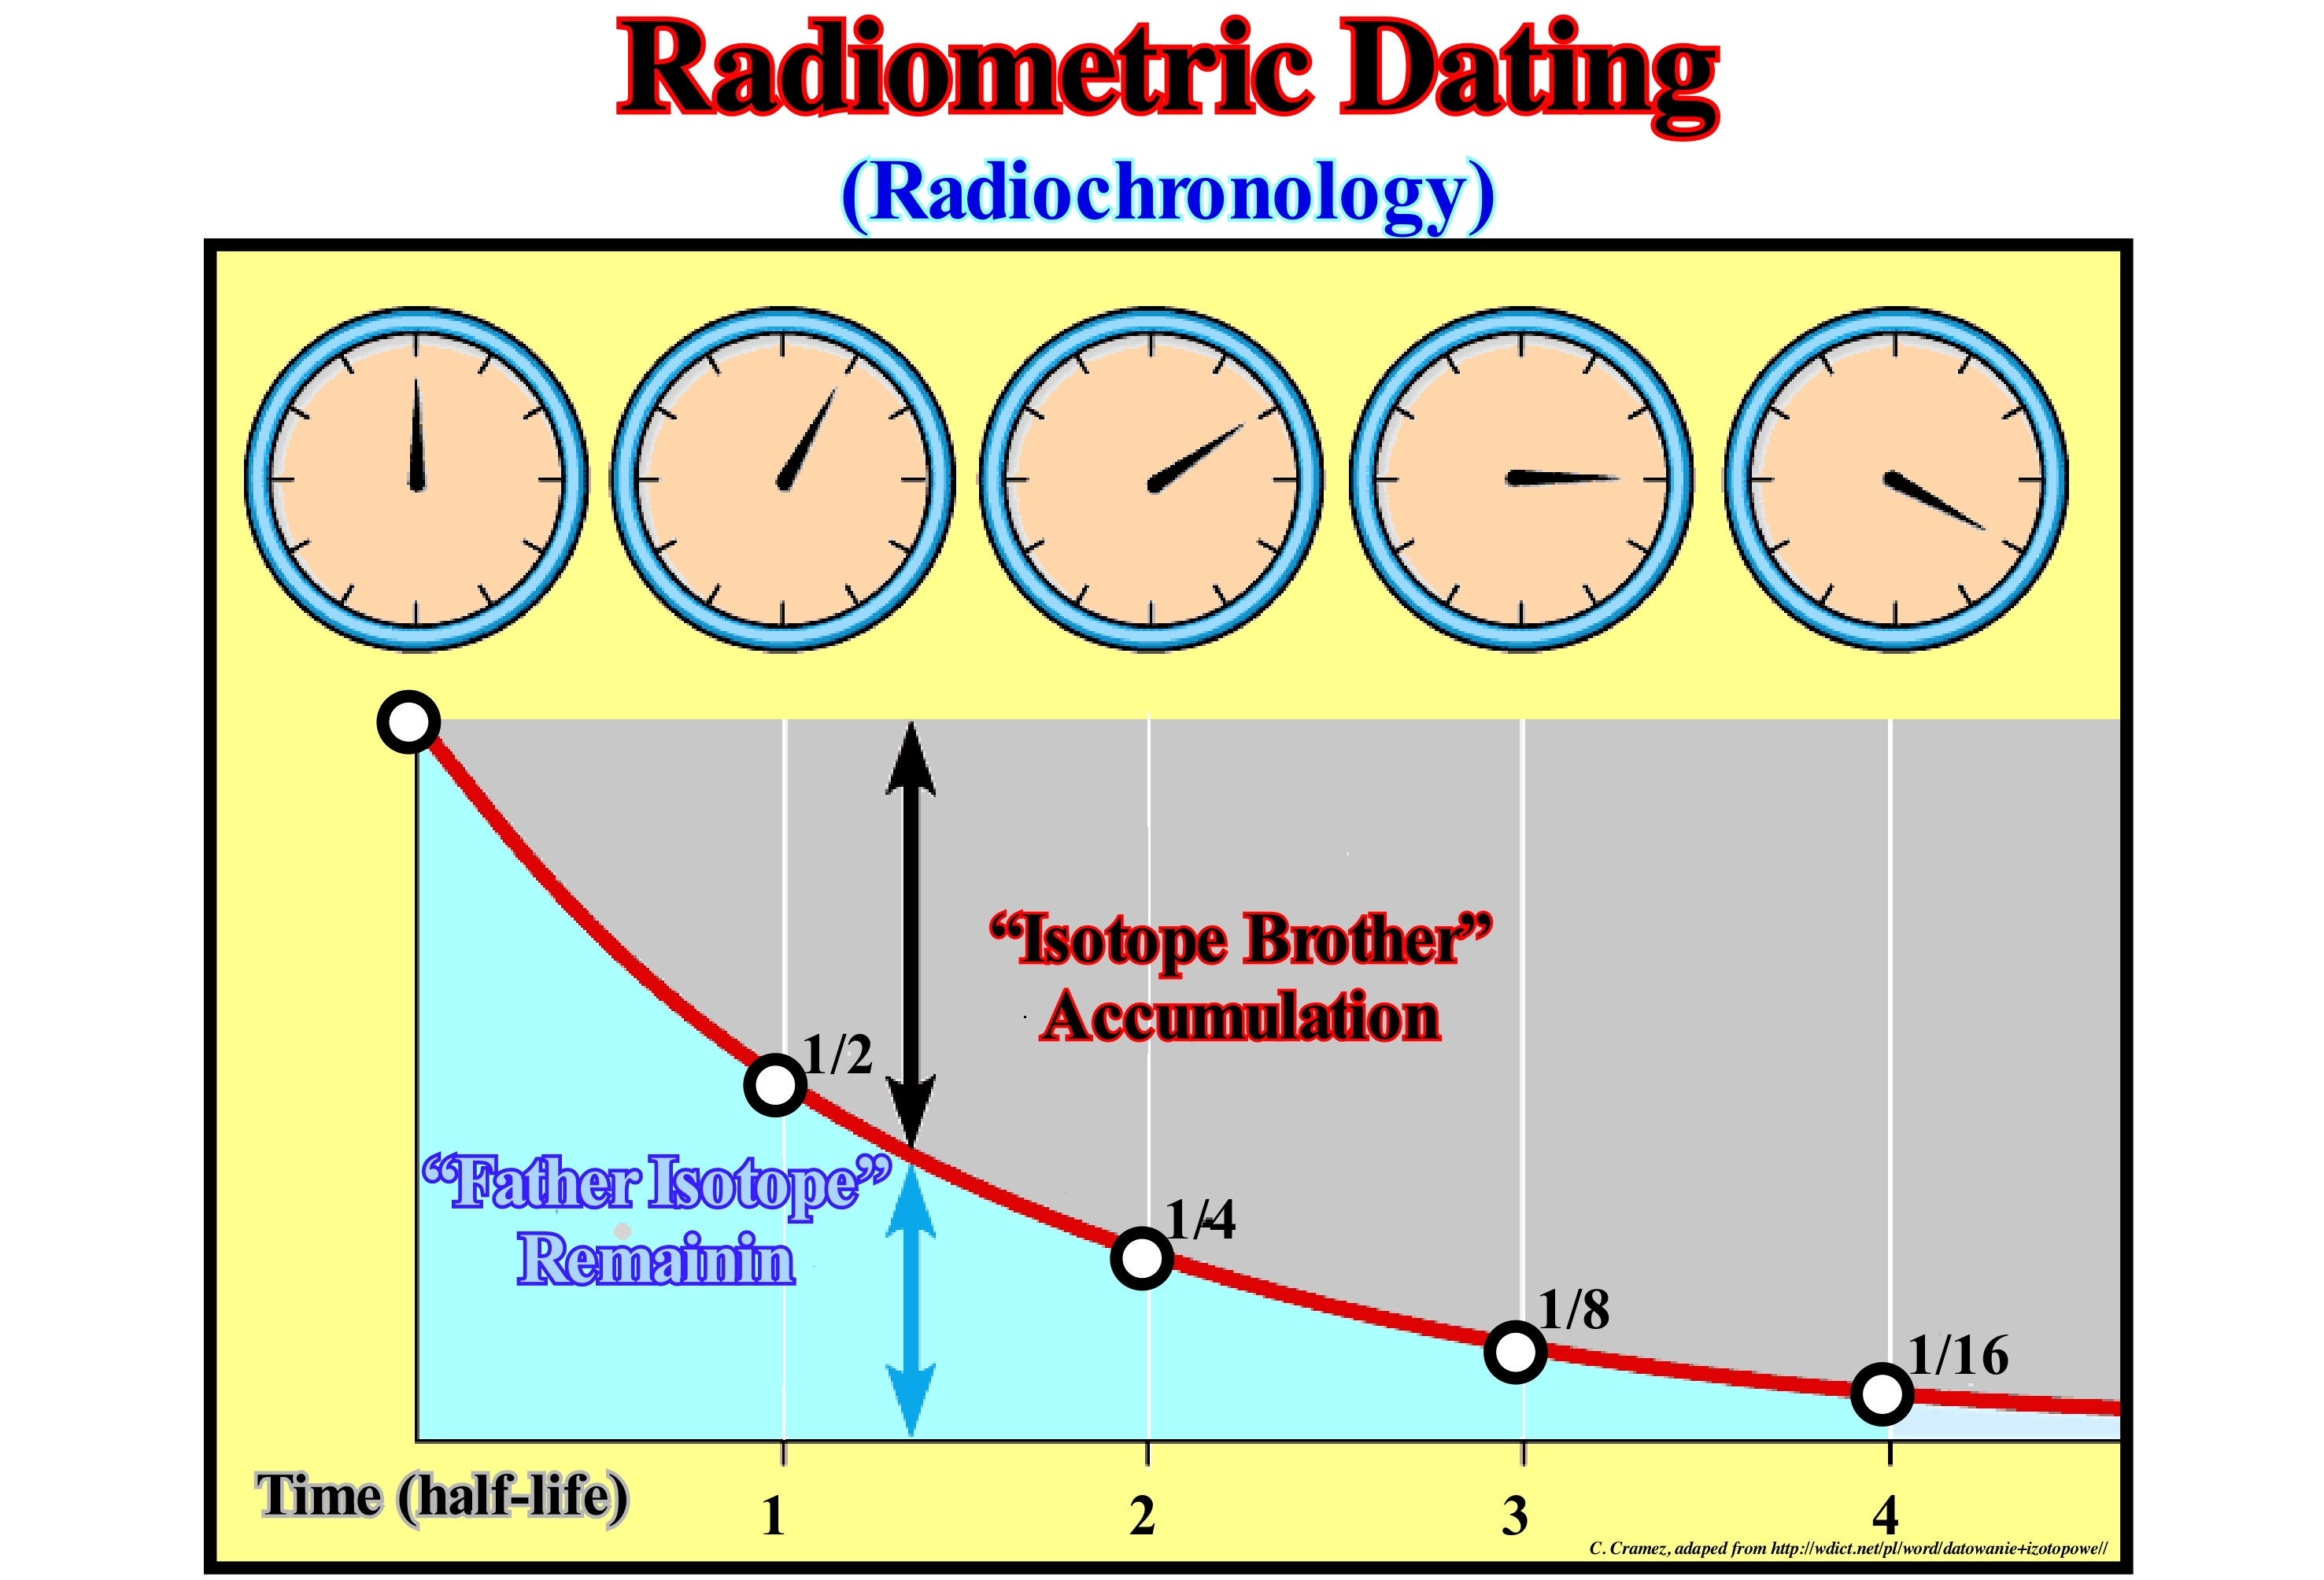 How are radiometric dating methods used in geochronology?